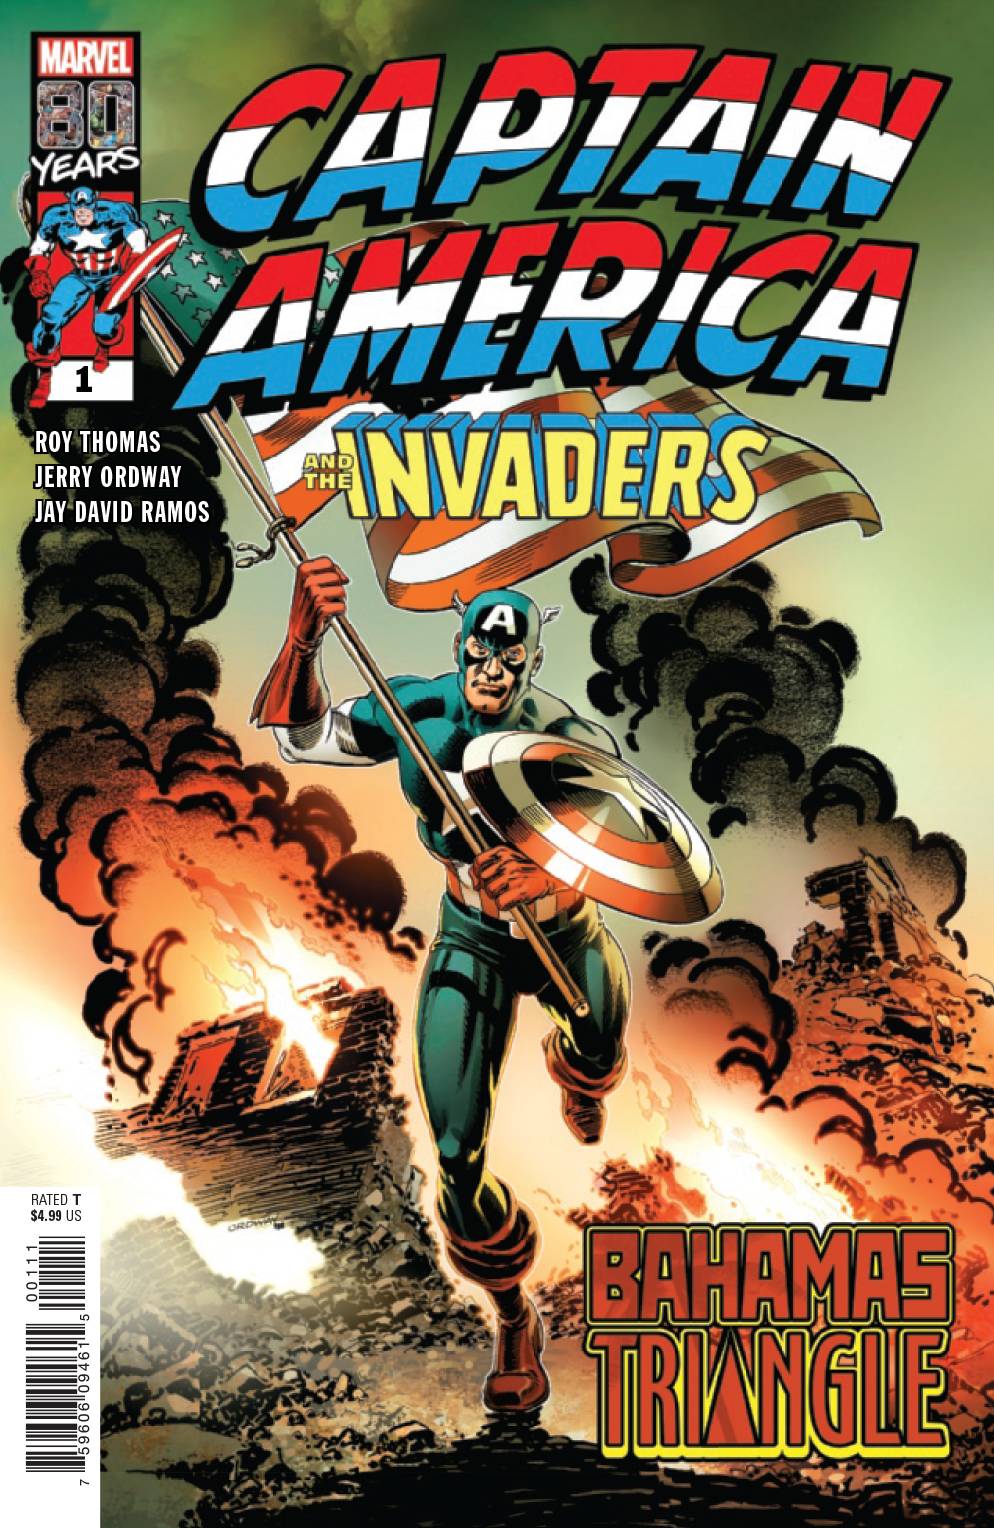 Captain America Invaders Bahamas Triangle #1 - State of Comics